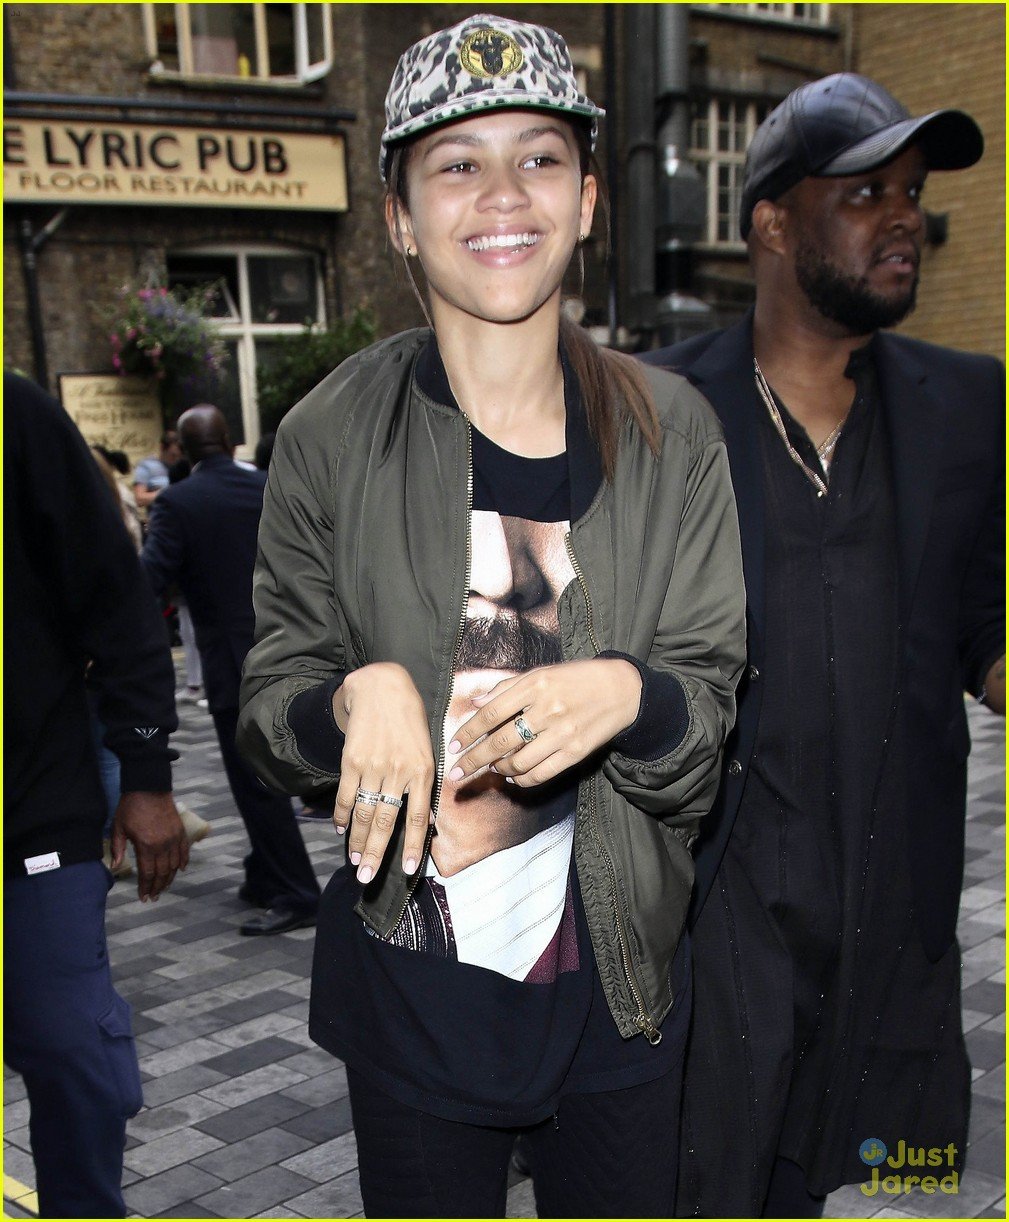 Zendaya is All About Her Fans in London! | Photo 849331 - Photo Gallery ...